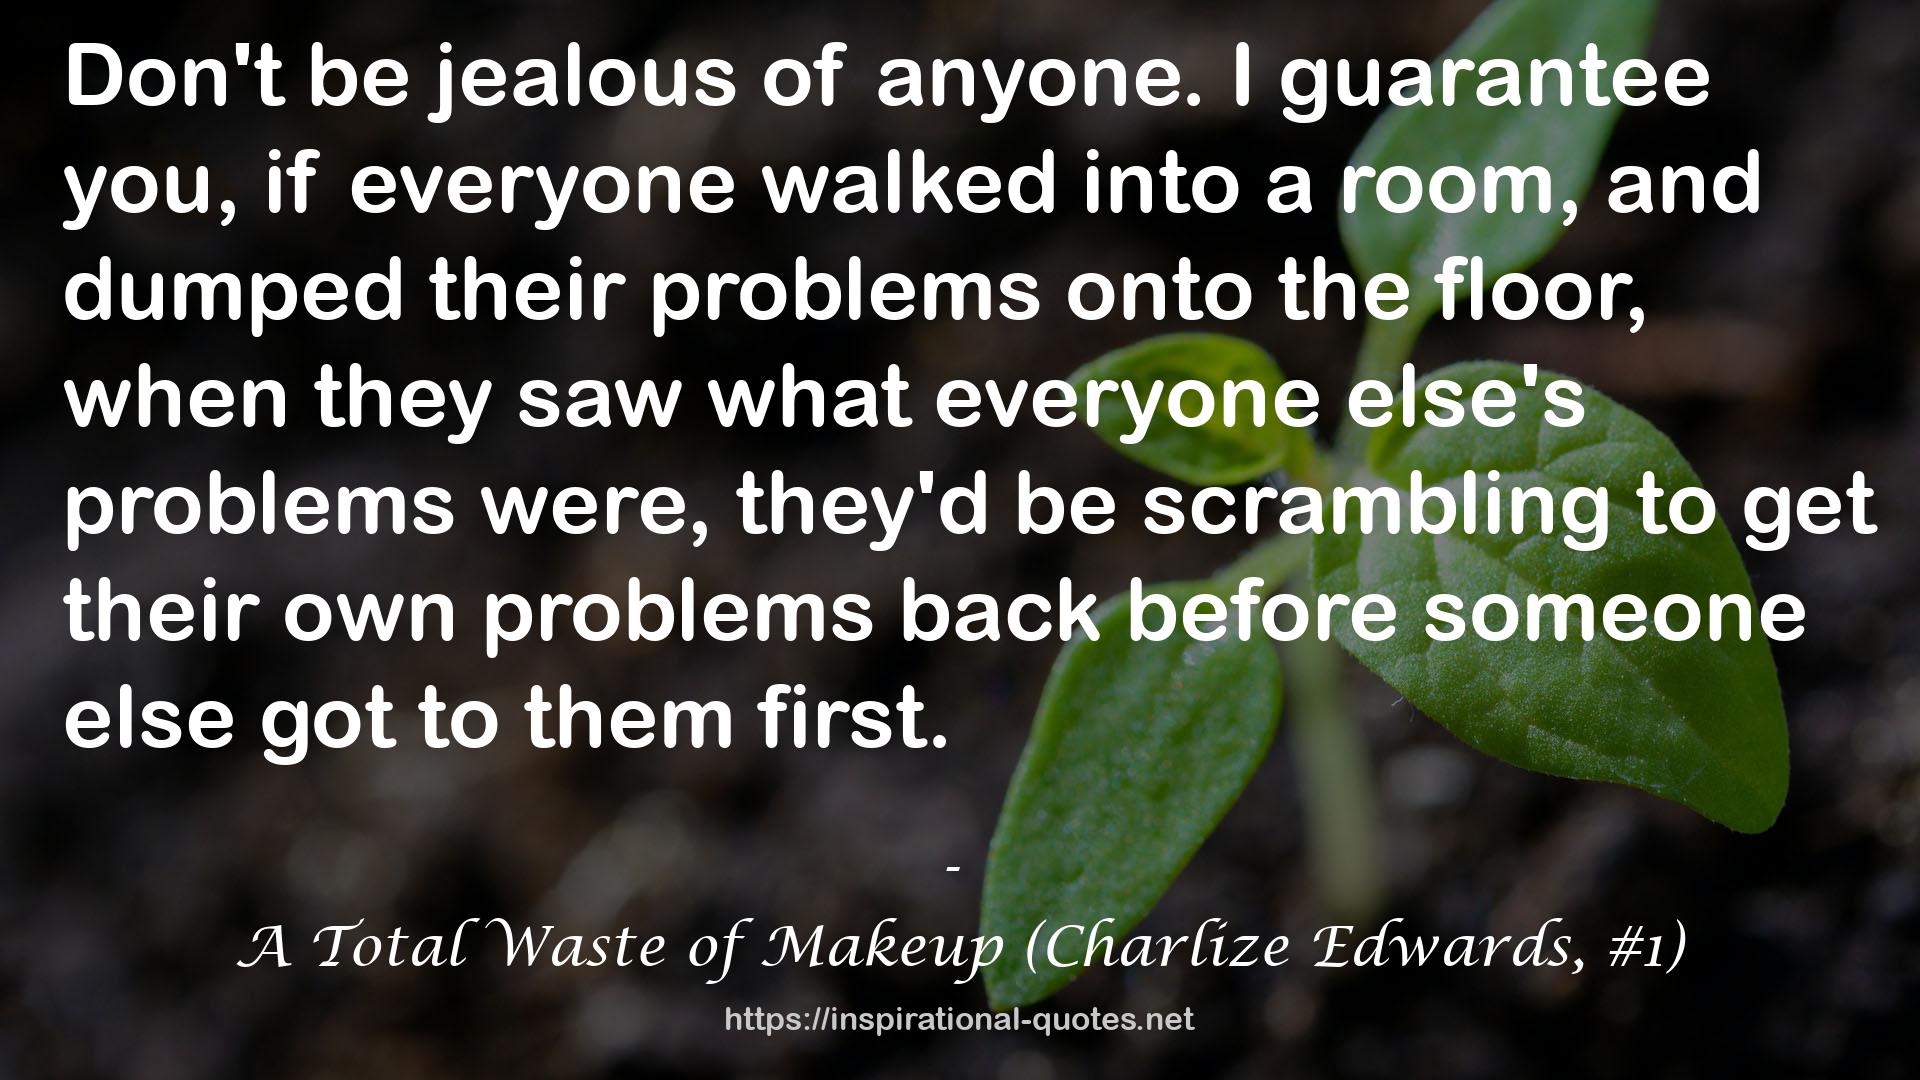 A Total Waste of Makeup (Charlize Edwards, #1) QUOTES